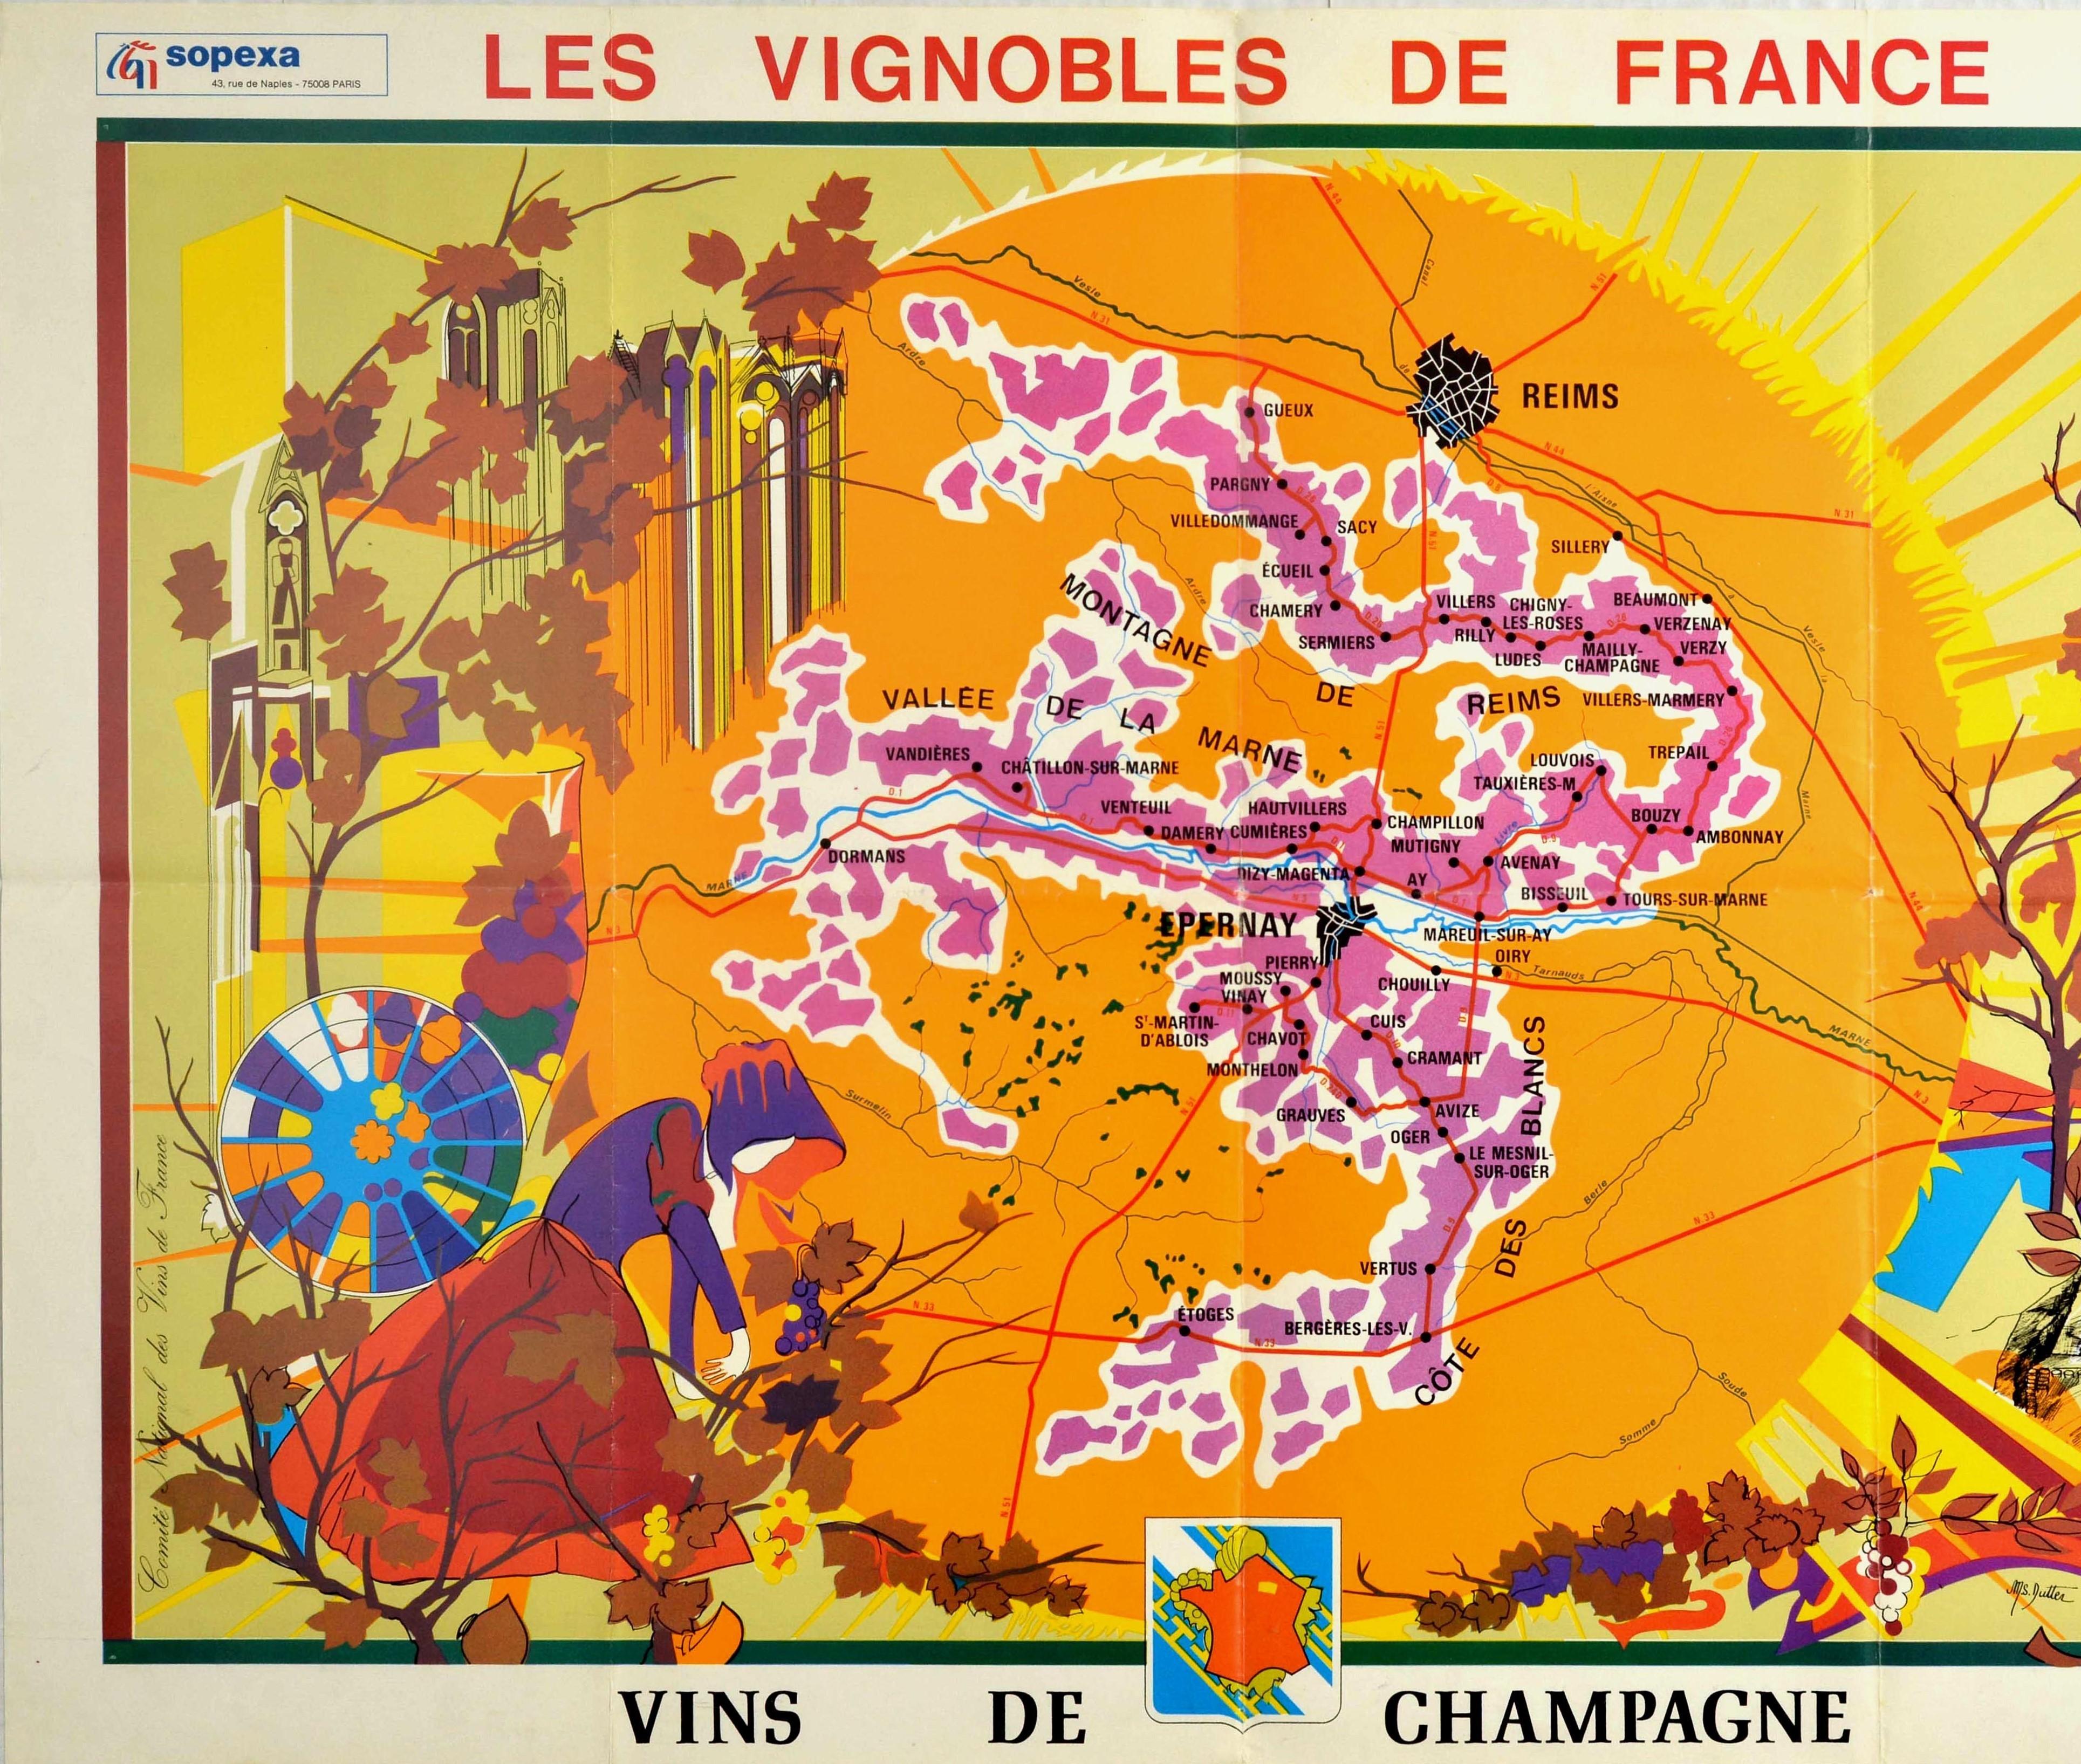 Original vintage advertising poster for Les Vignobles de France Vins de Champagne / The Vineyards of France Wines of Champagne featuring a pictographic map of the Champagne wine region framed by an illustration of a lady gathering grapes from a vine